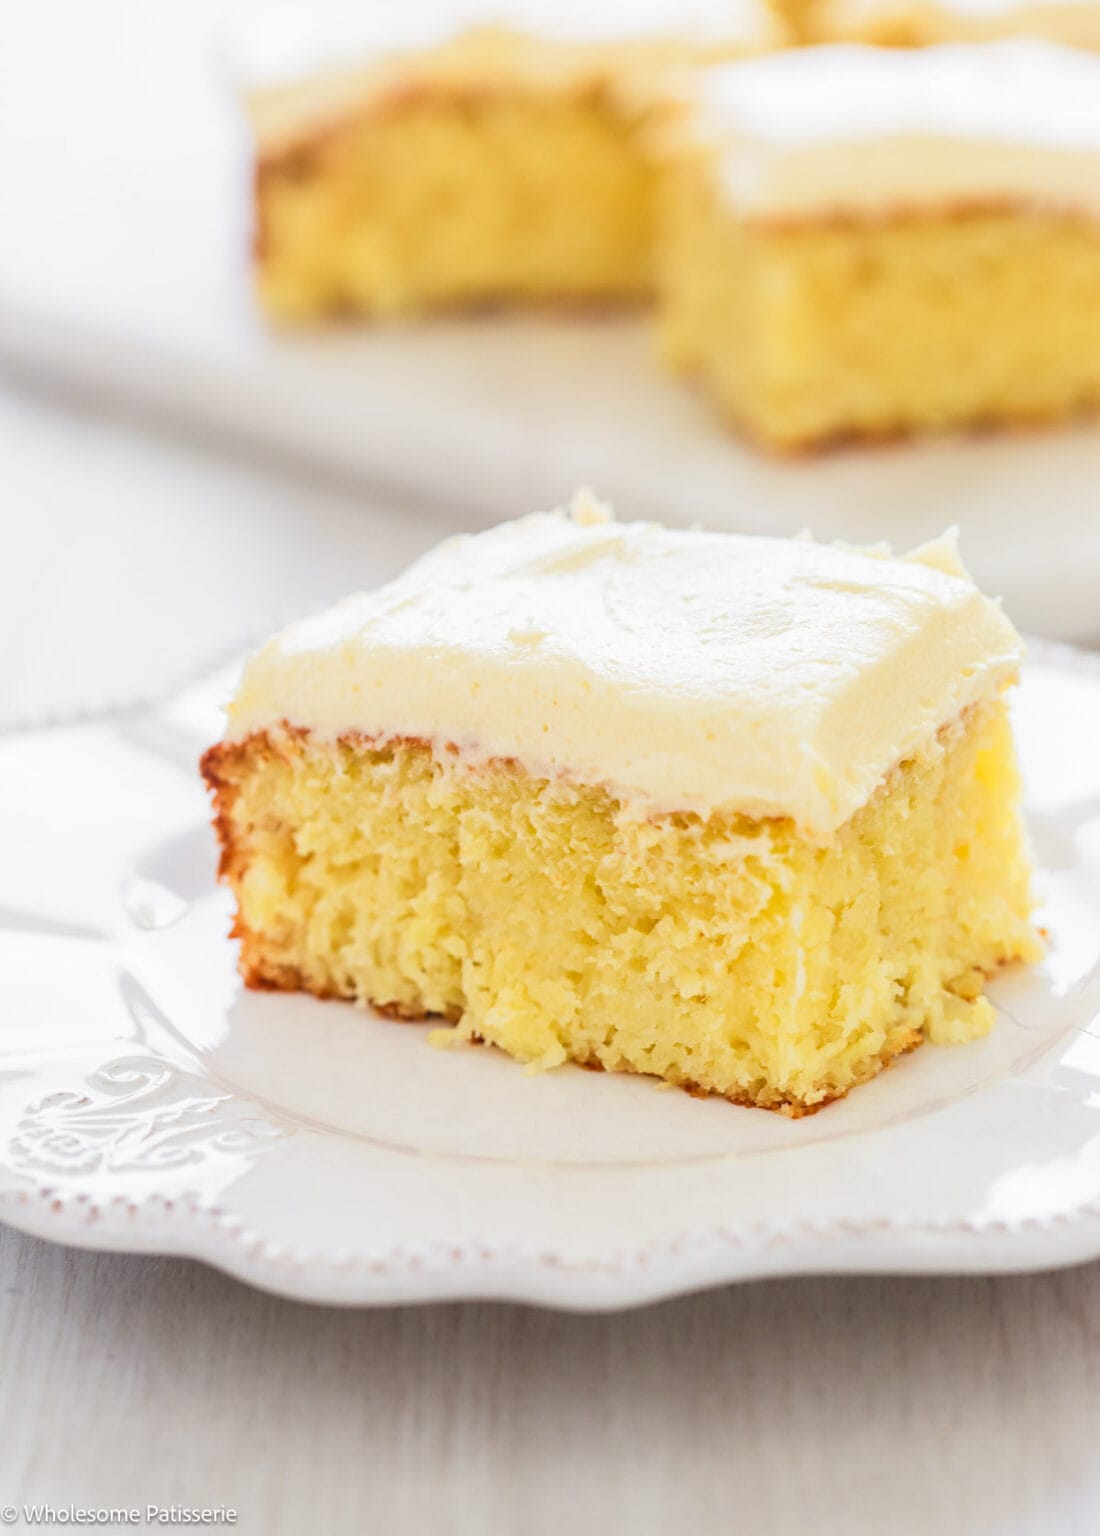 Easy Pineapple Cake With Cake Mix - Wholesome Patisserie